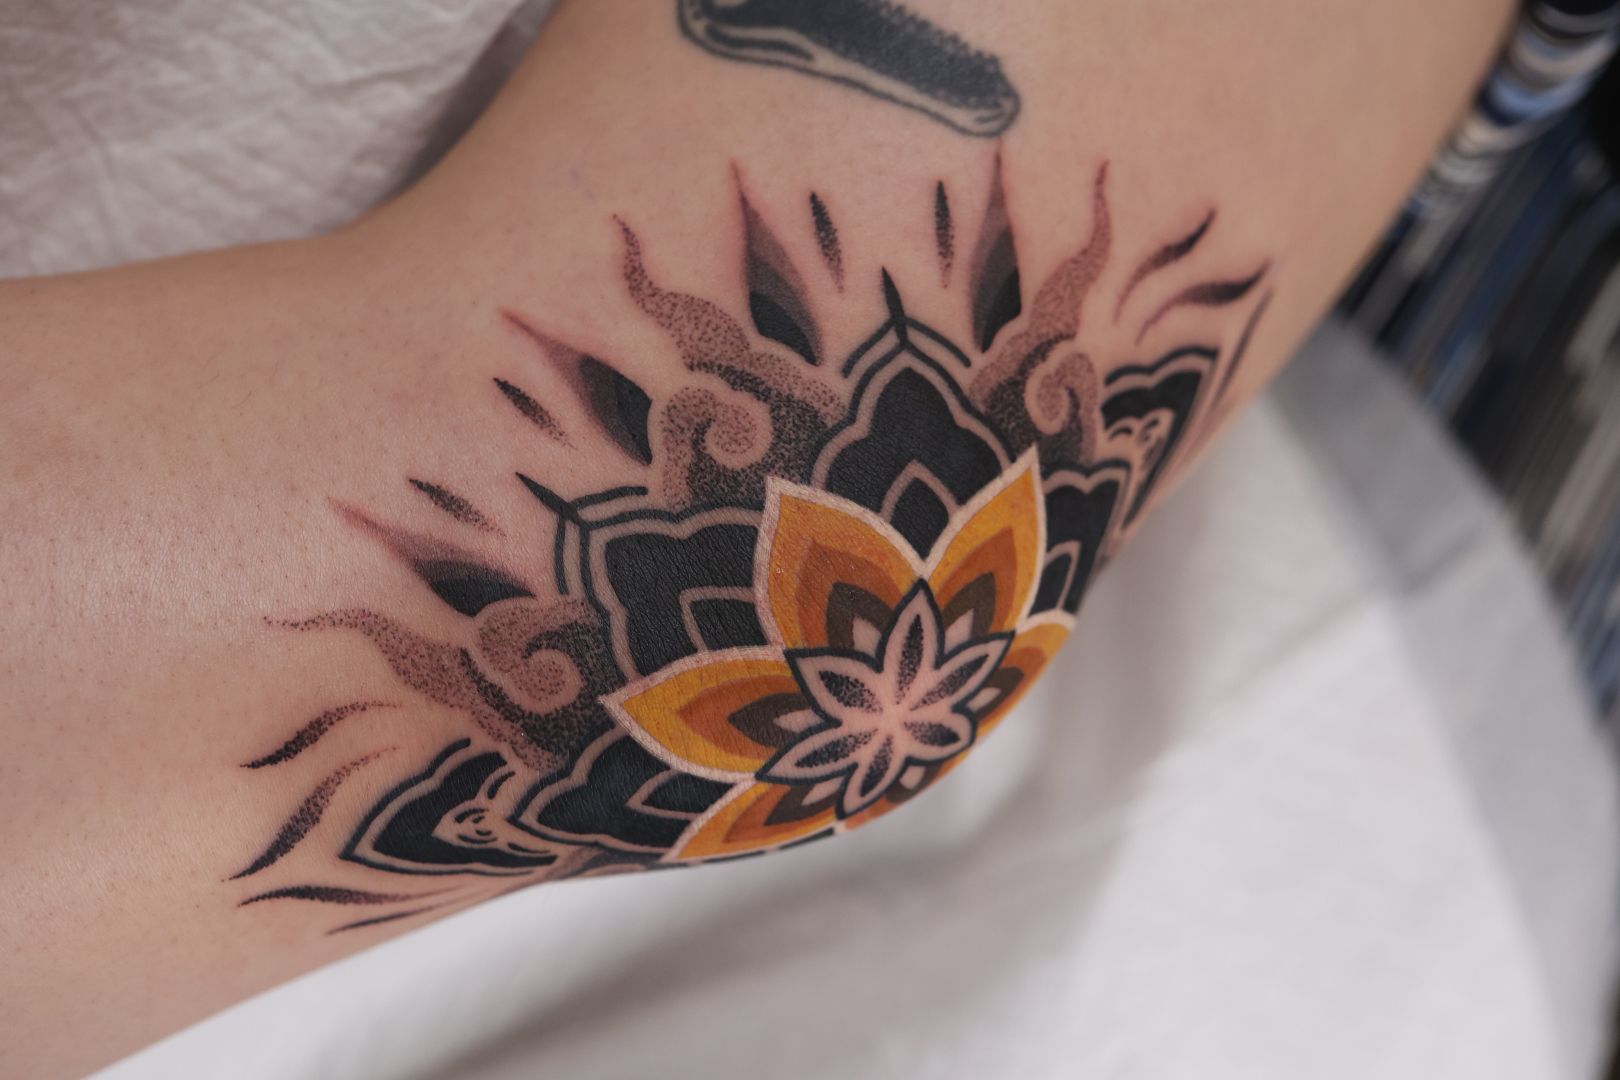 Pinched ink: is it wrong to steal a tattoo? | Tattoos | The Guardian